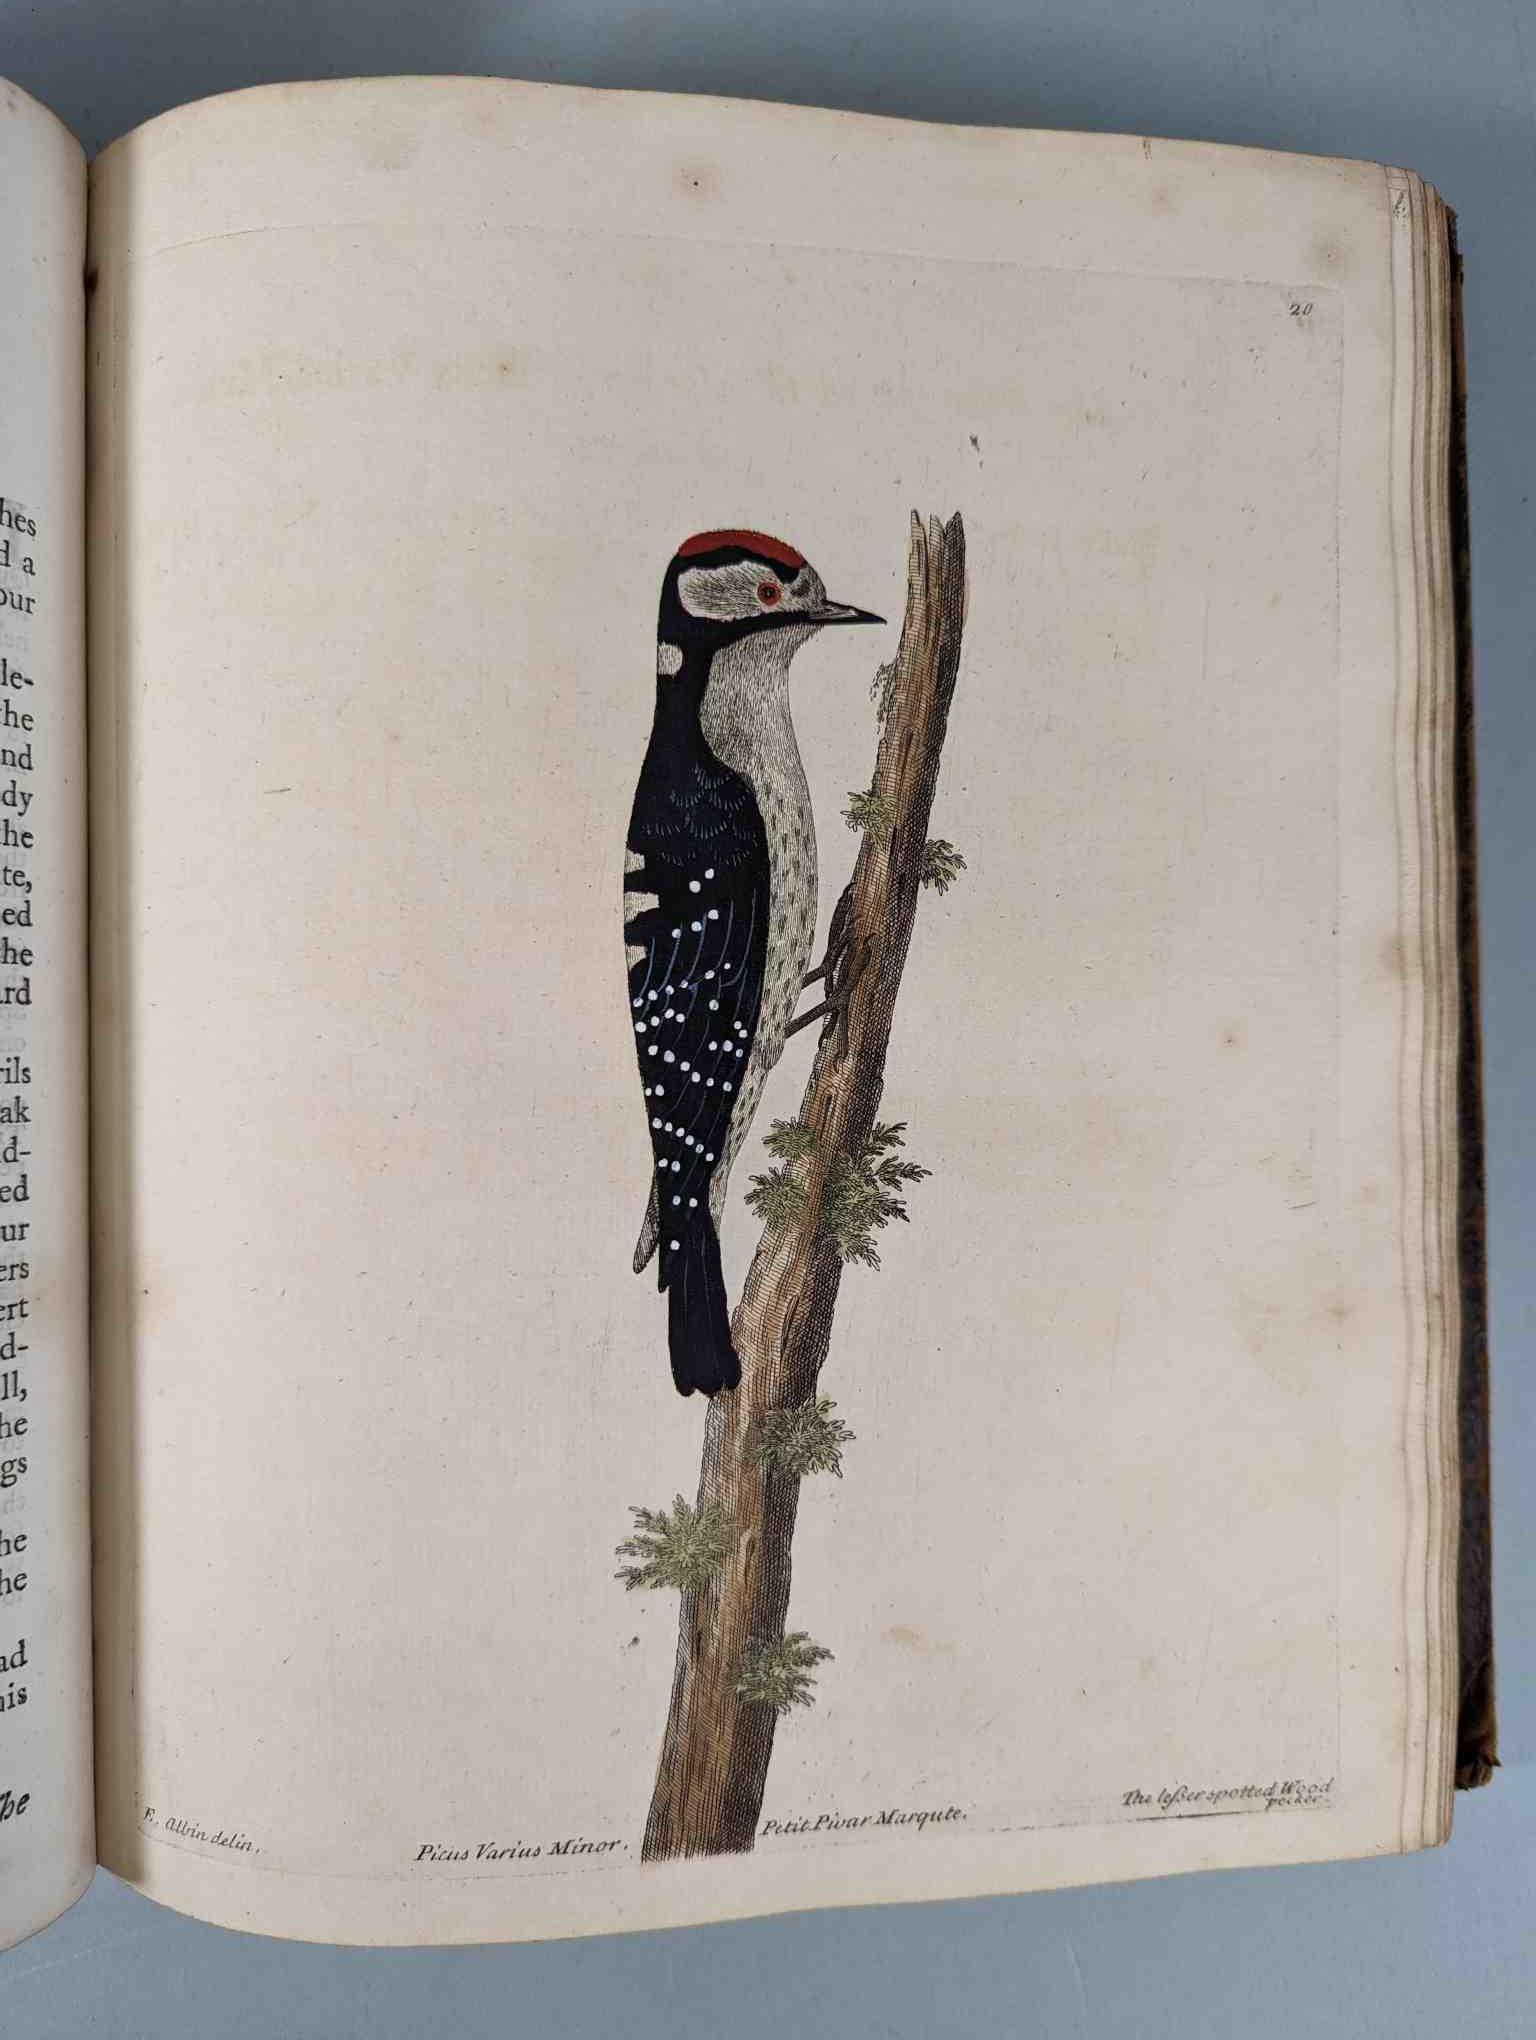 ALBIN, Eleazar. A Natural History of Birds, to which are added, Notes and Observations by W. - Image 23 of 208